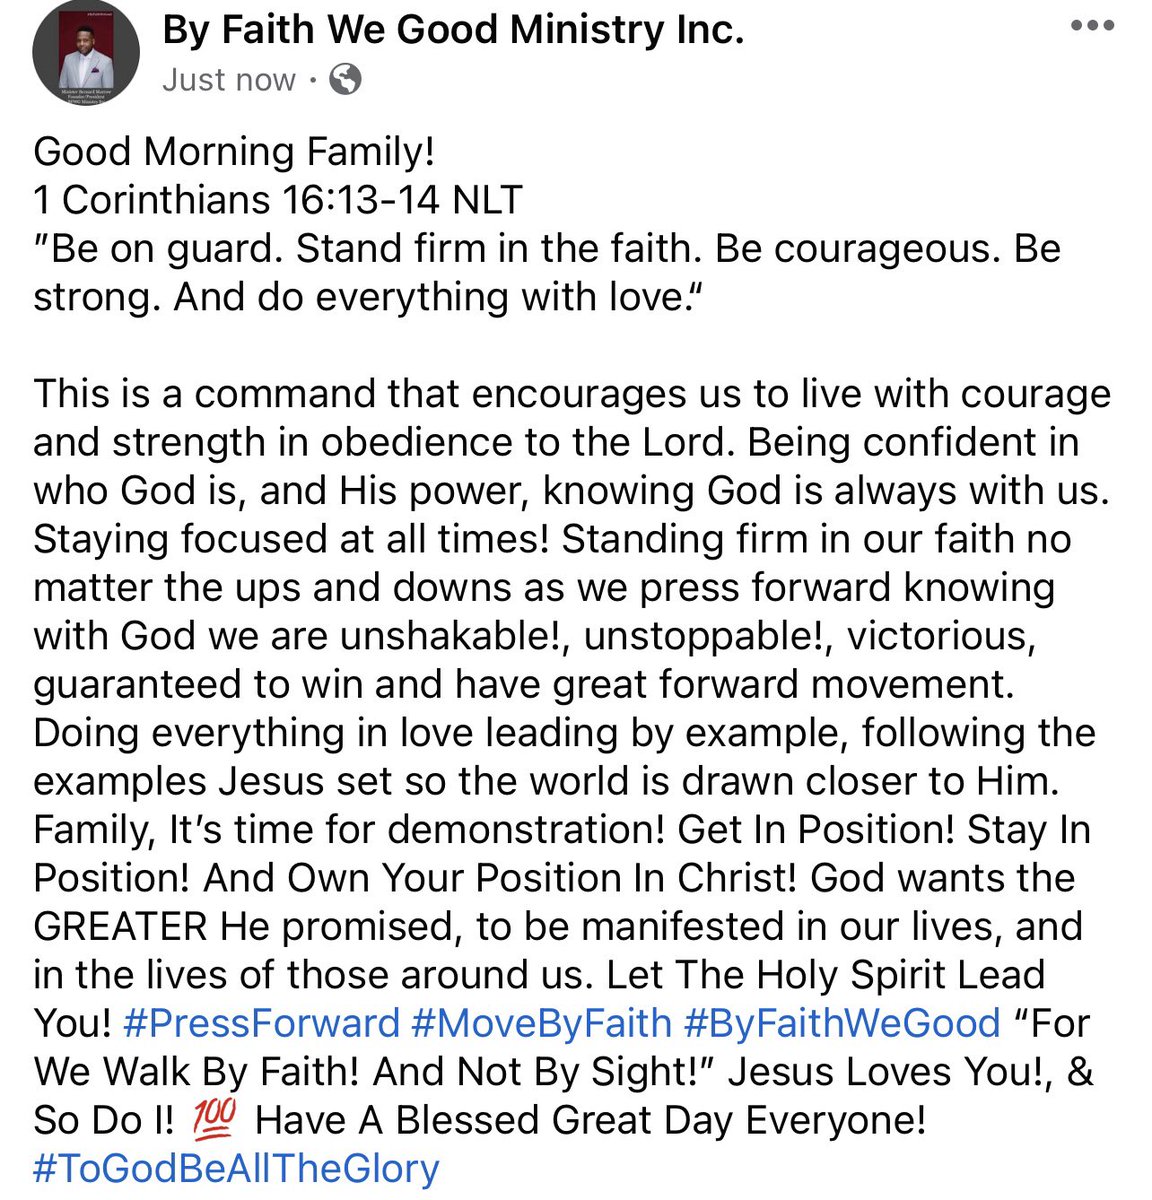 Good Morning Family! 
Get In Position! Stay In Position! And Own Your Position In Christ! Stay Focused! Let The Holy Spirit Lead You!

@ByFaithWeGood 
#ByFaithWeGood #InspirationalPost #MorningEncouragement #StayFocused